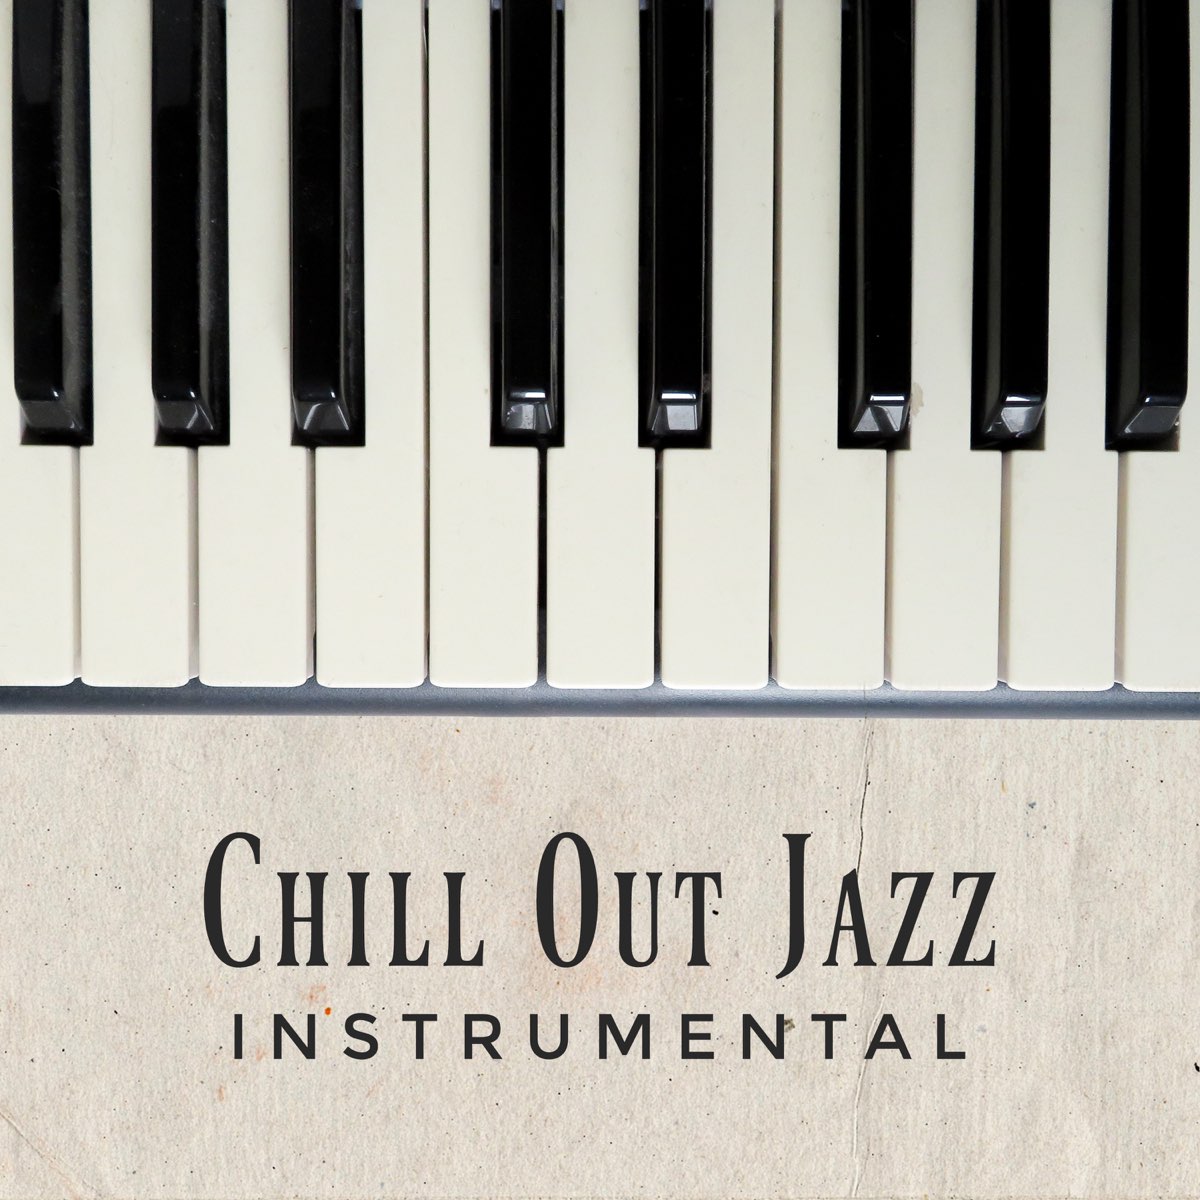 Chill Out Jazz Instrumental: Best Piano Music 2019, Background Sounds for  Lovers & Night Date, Total Relaxation de Amazing Chill Out Jazz Paradise en  Apple Music